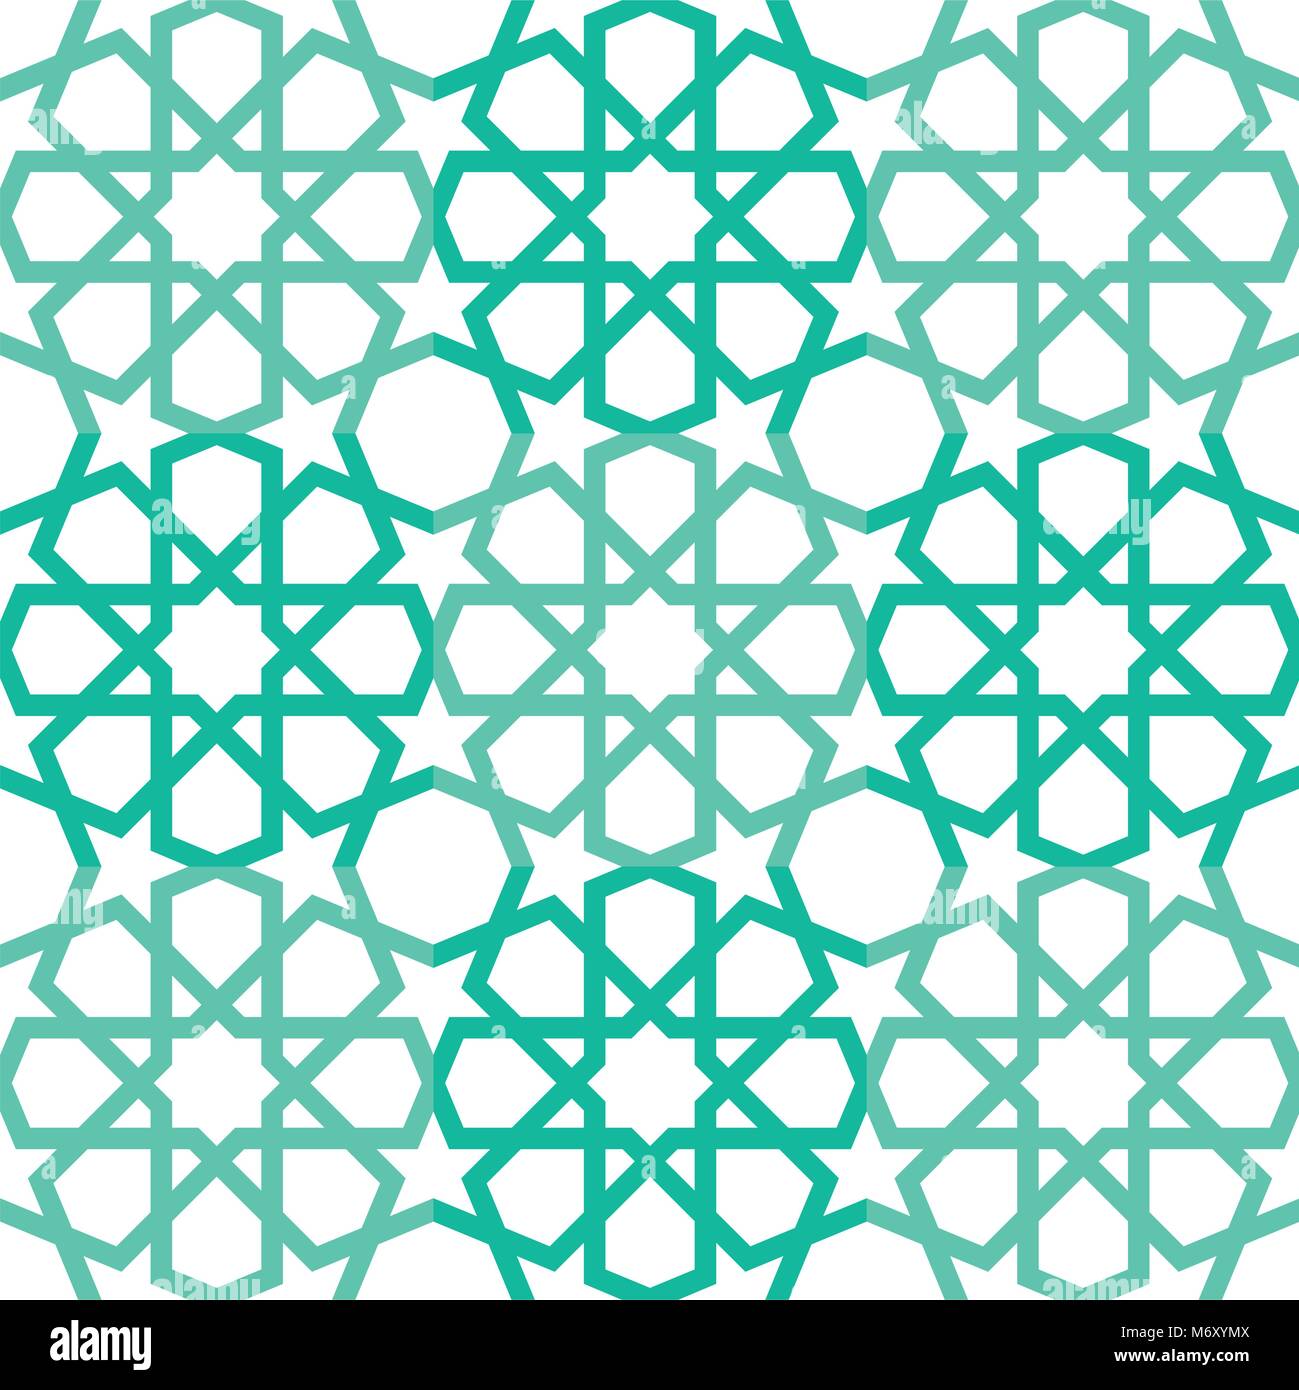 Repeatable Seamless Islamic Star Pattern Isolated on White Background Stock Vector